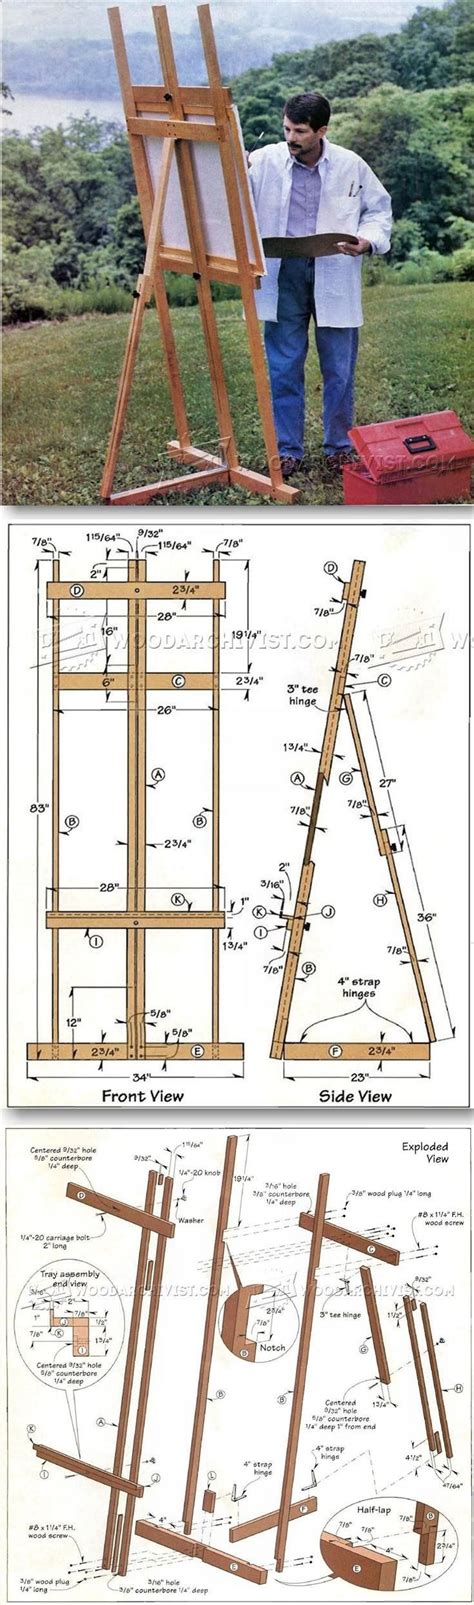 Diy Art Easel Woodworking Plans And Projects